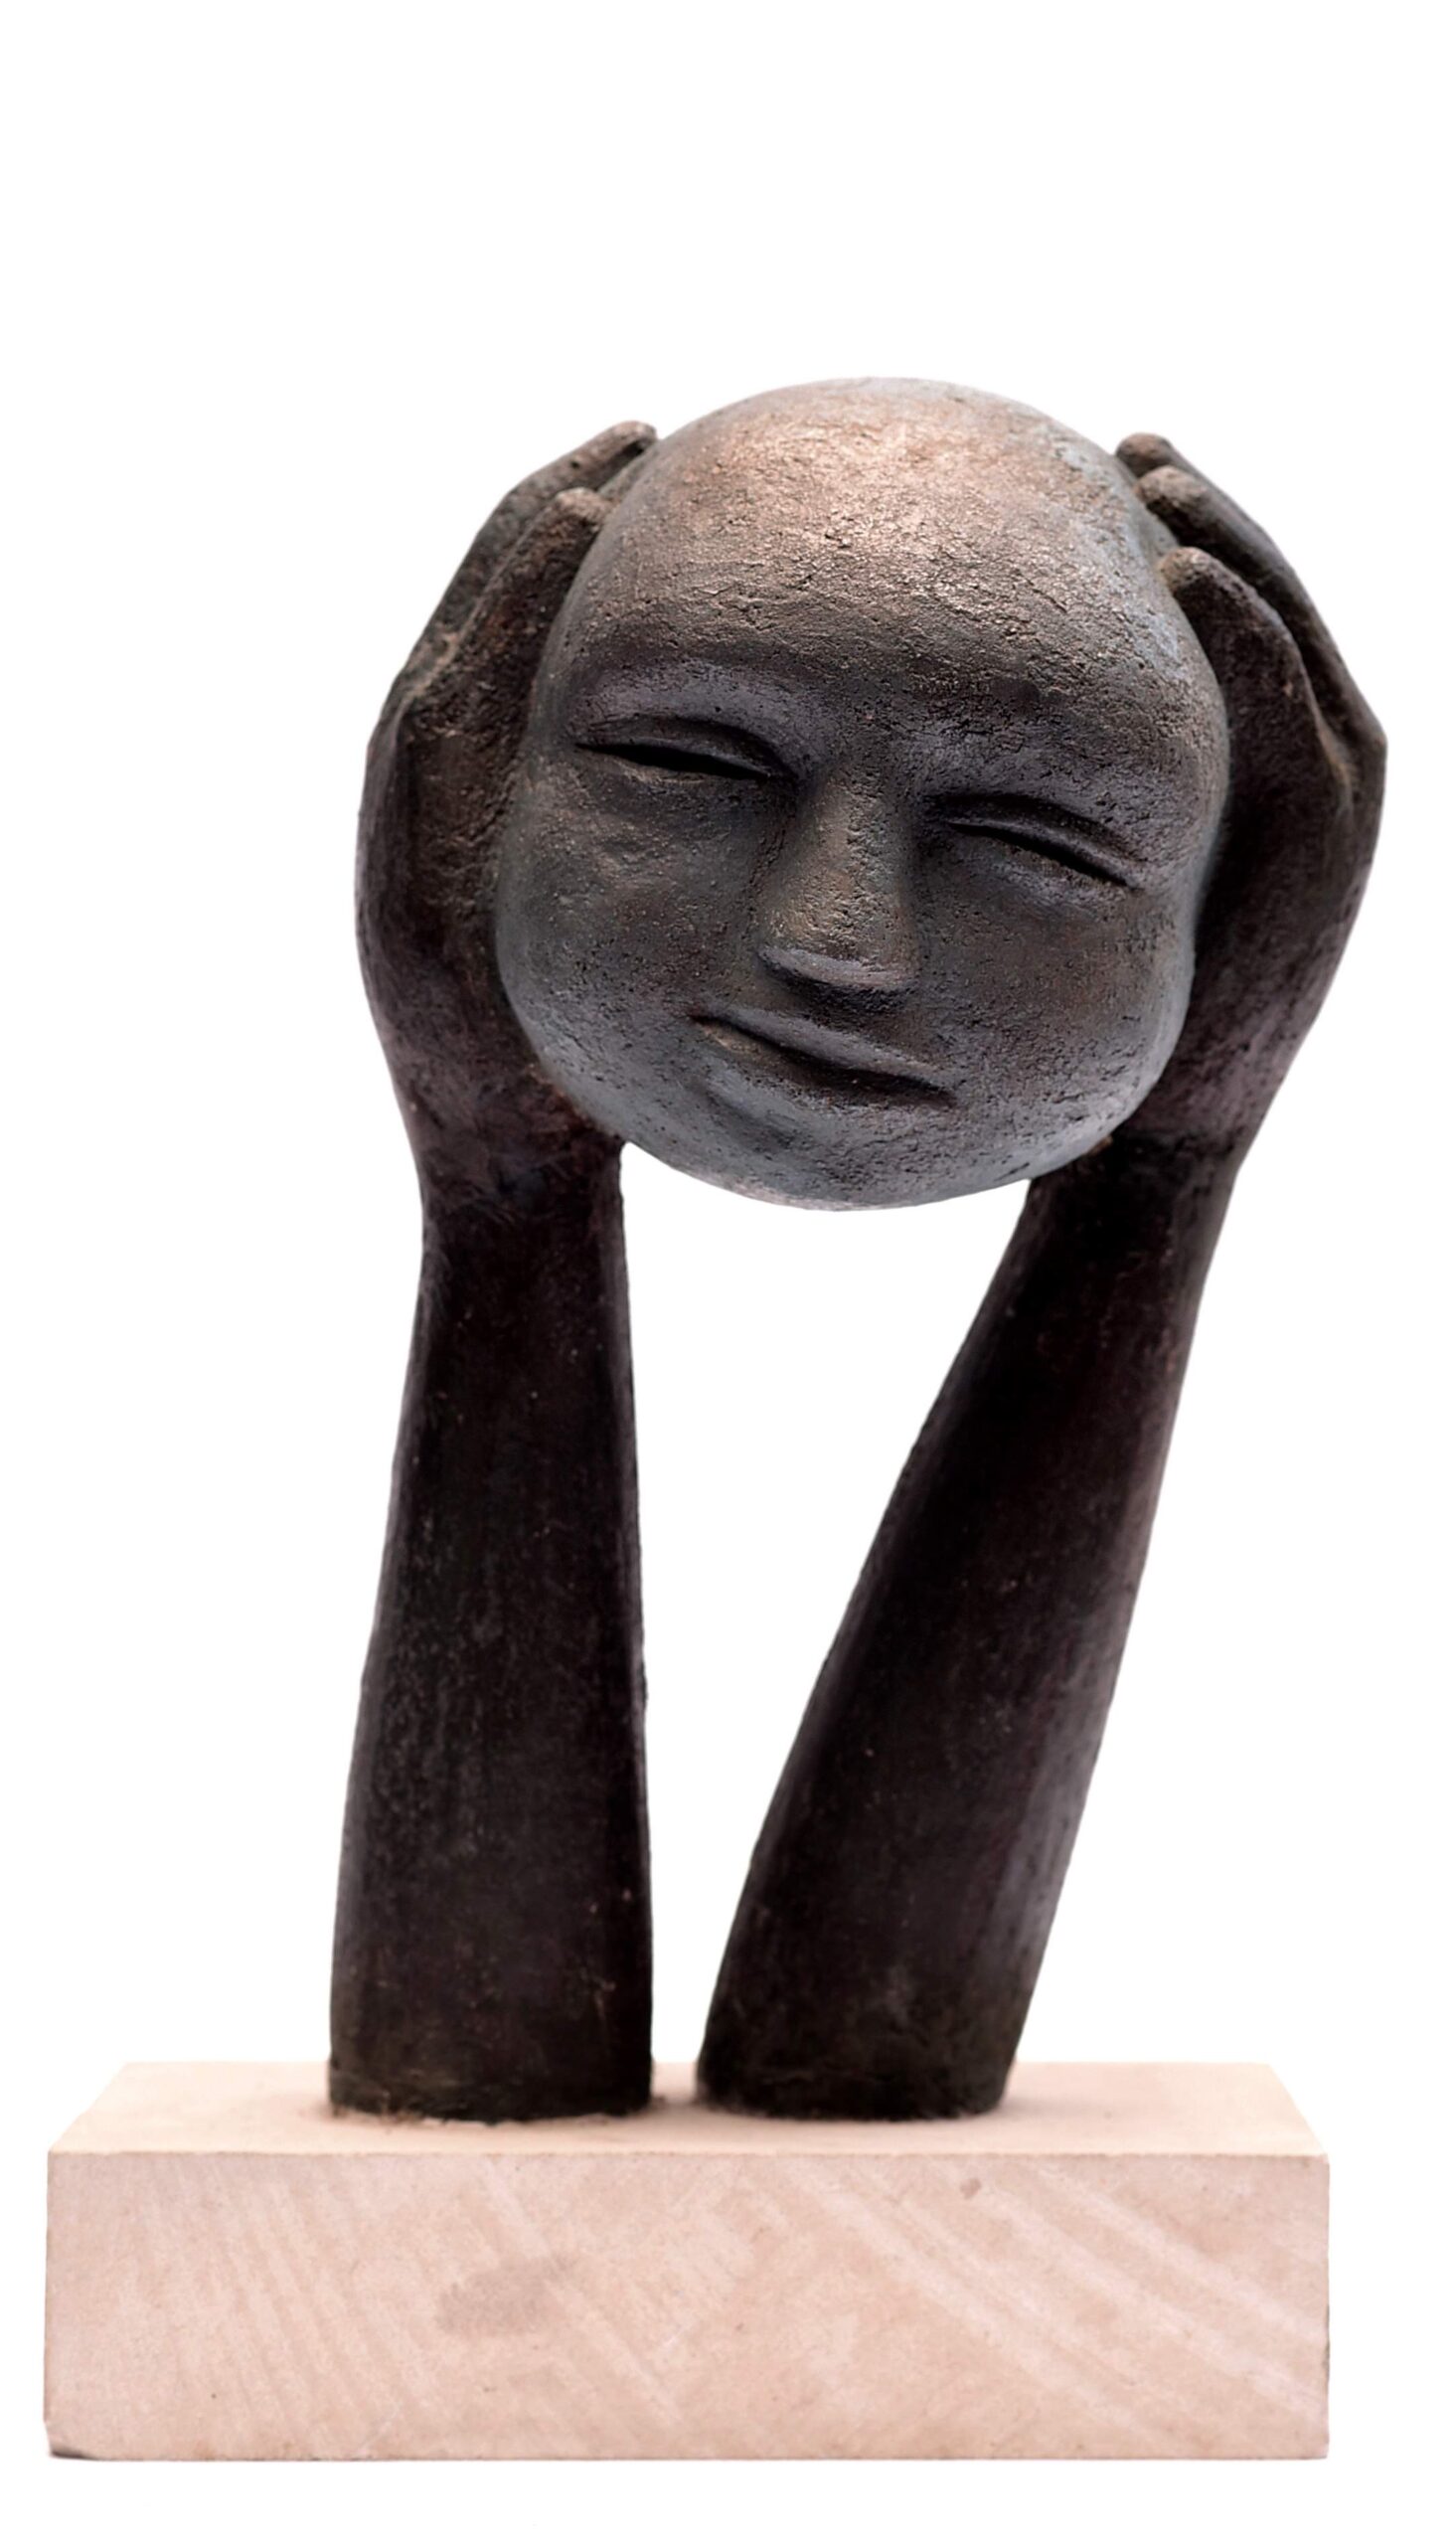 contemporary sculpture of a head held up on its hands